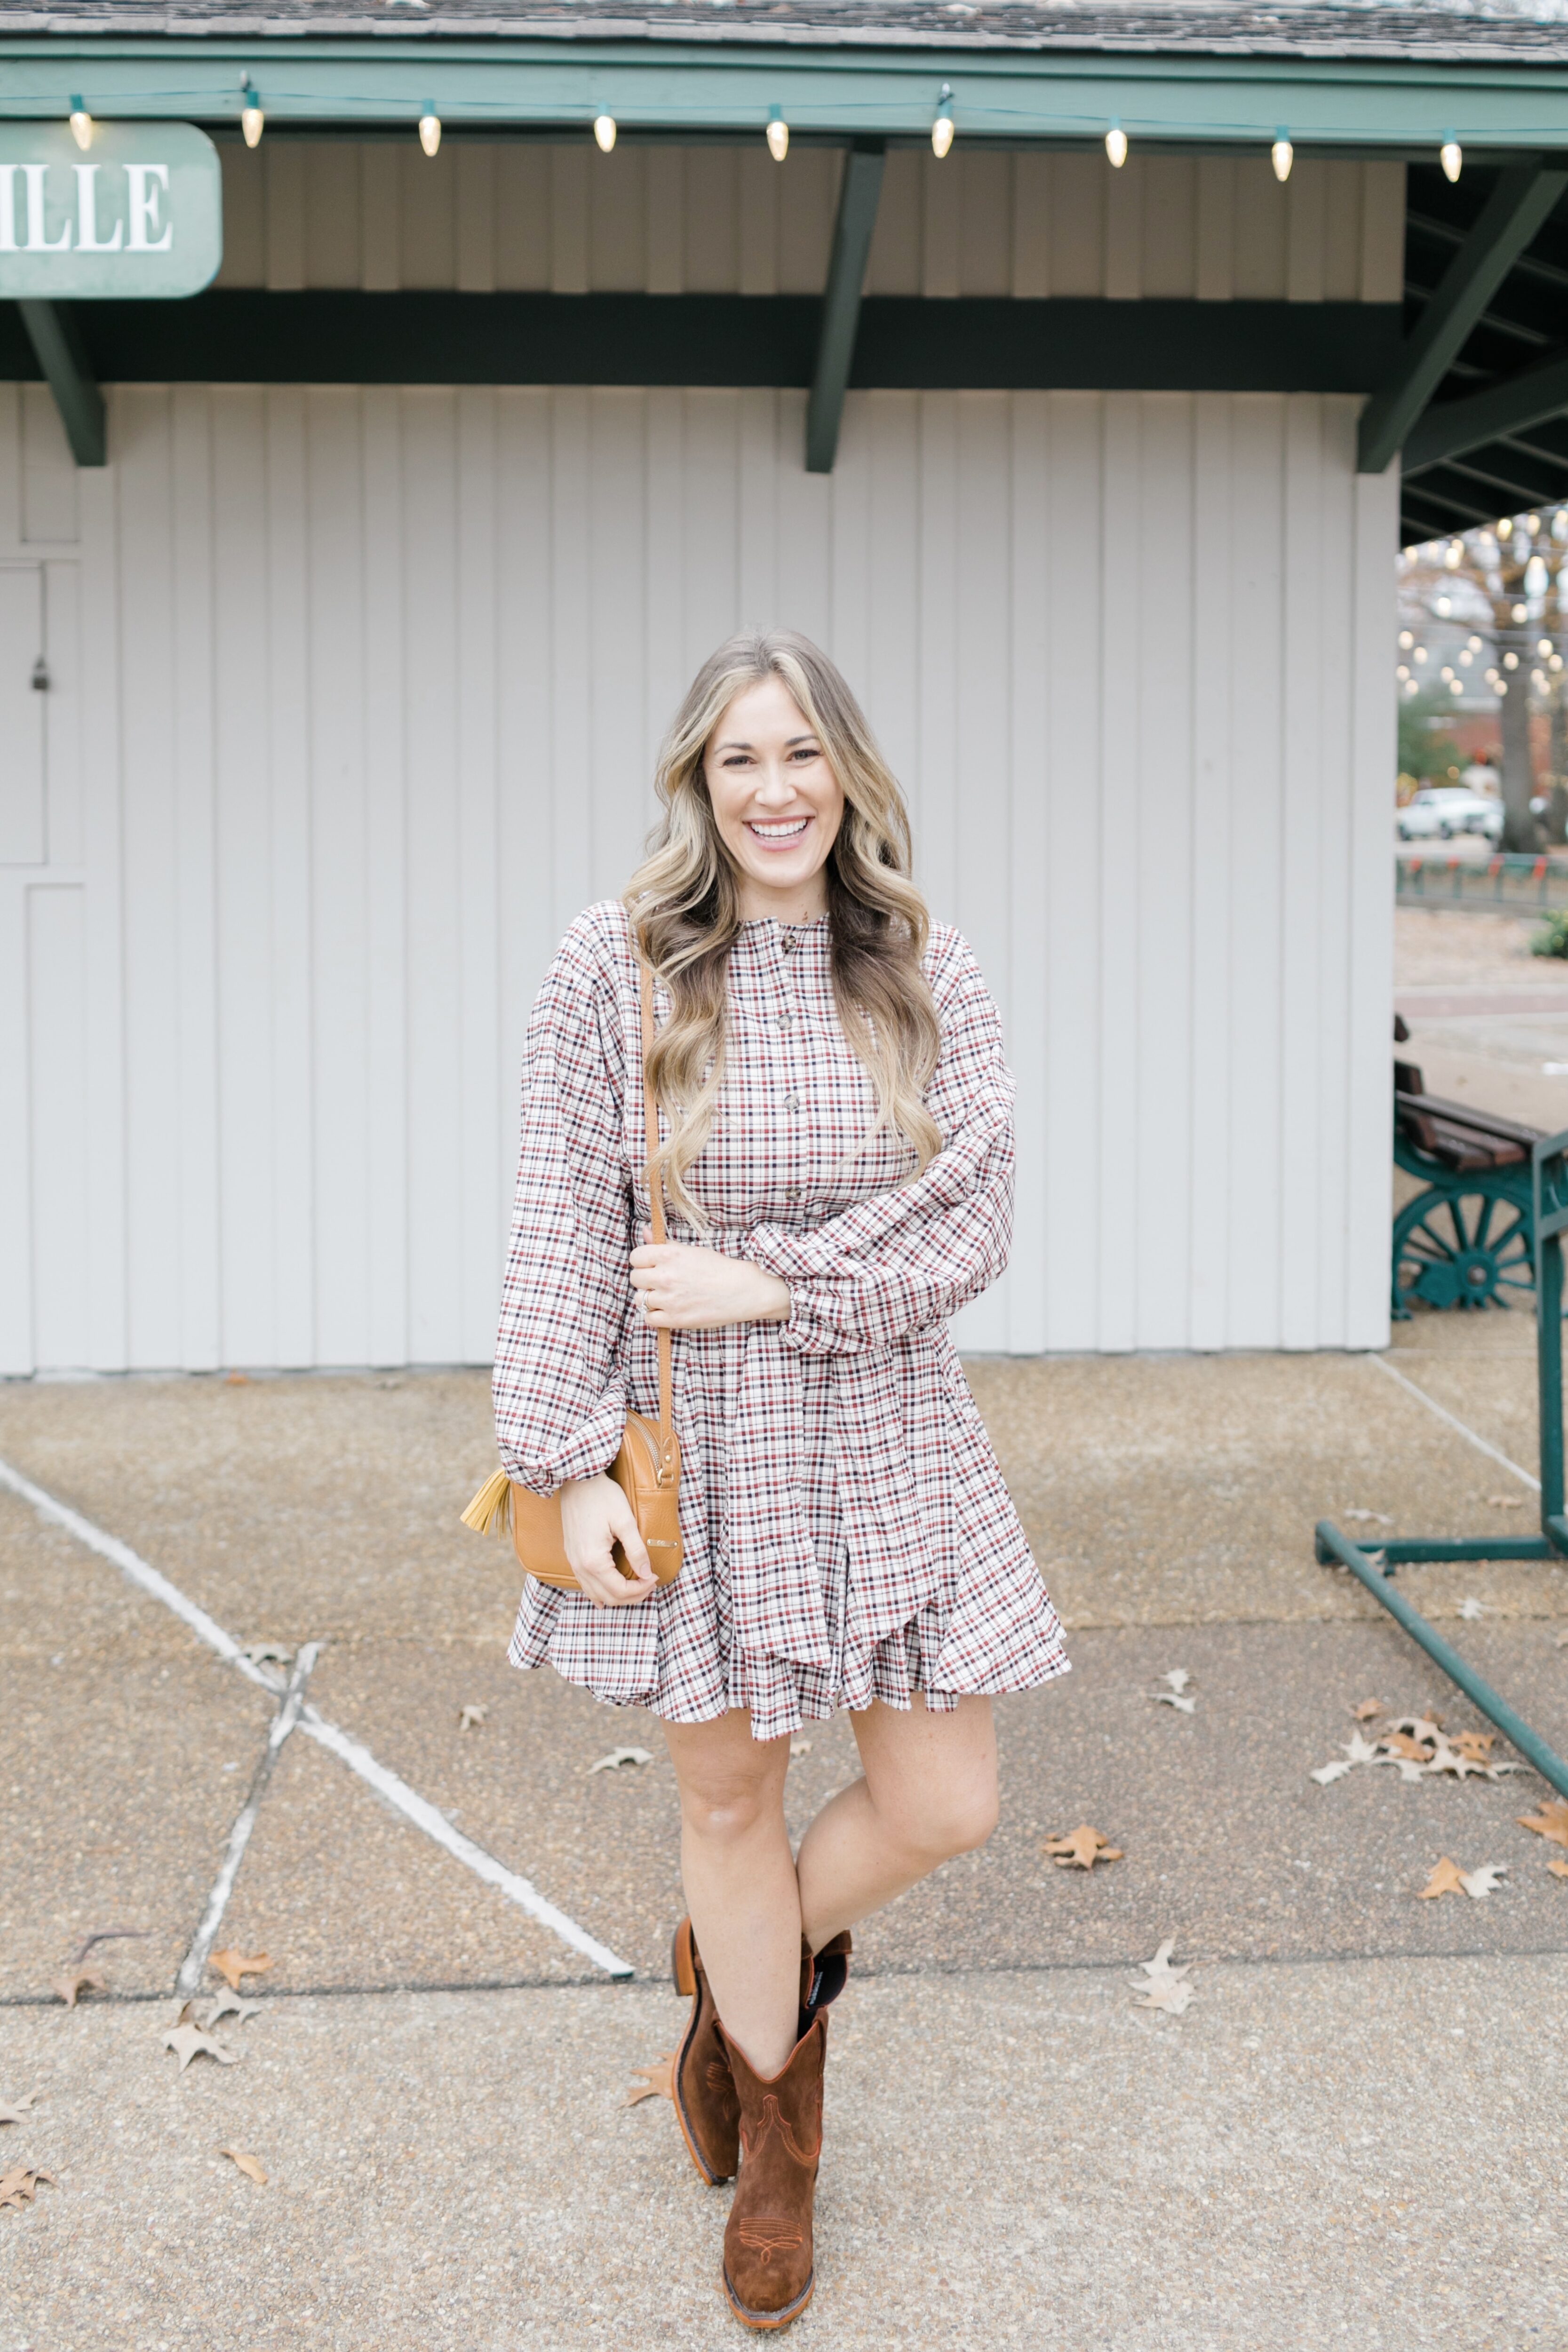 Dresses Wear With Cowboy Boots  : How to Perfectly Pair Your Dresses with Cowboy Boots